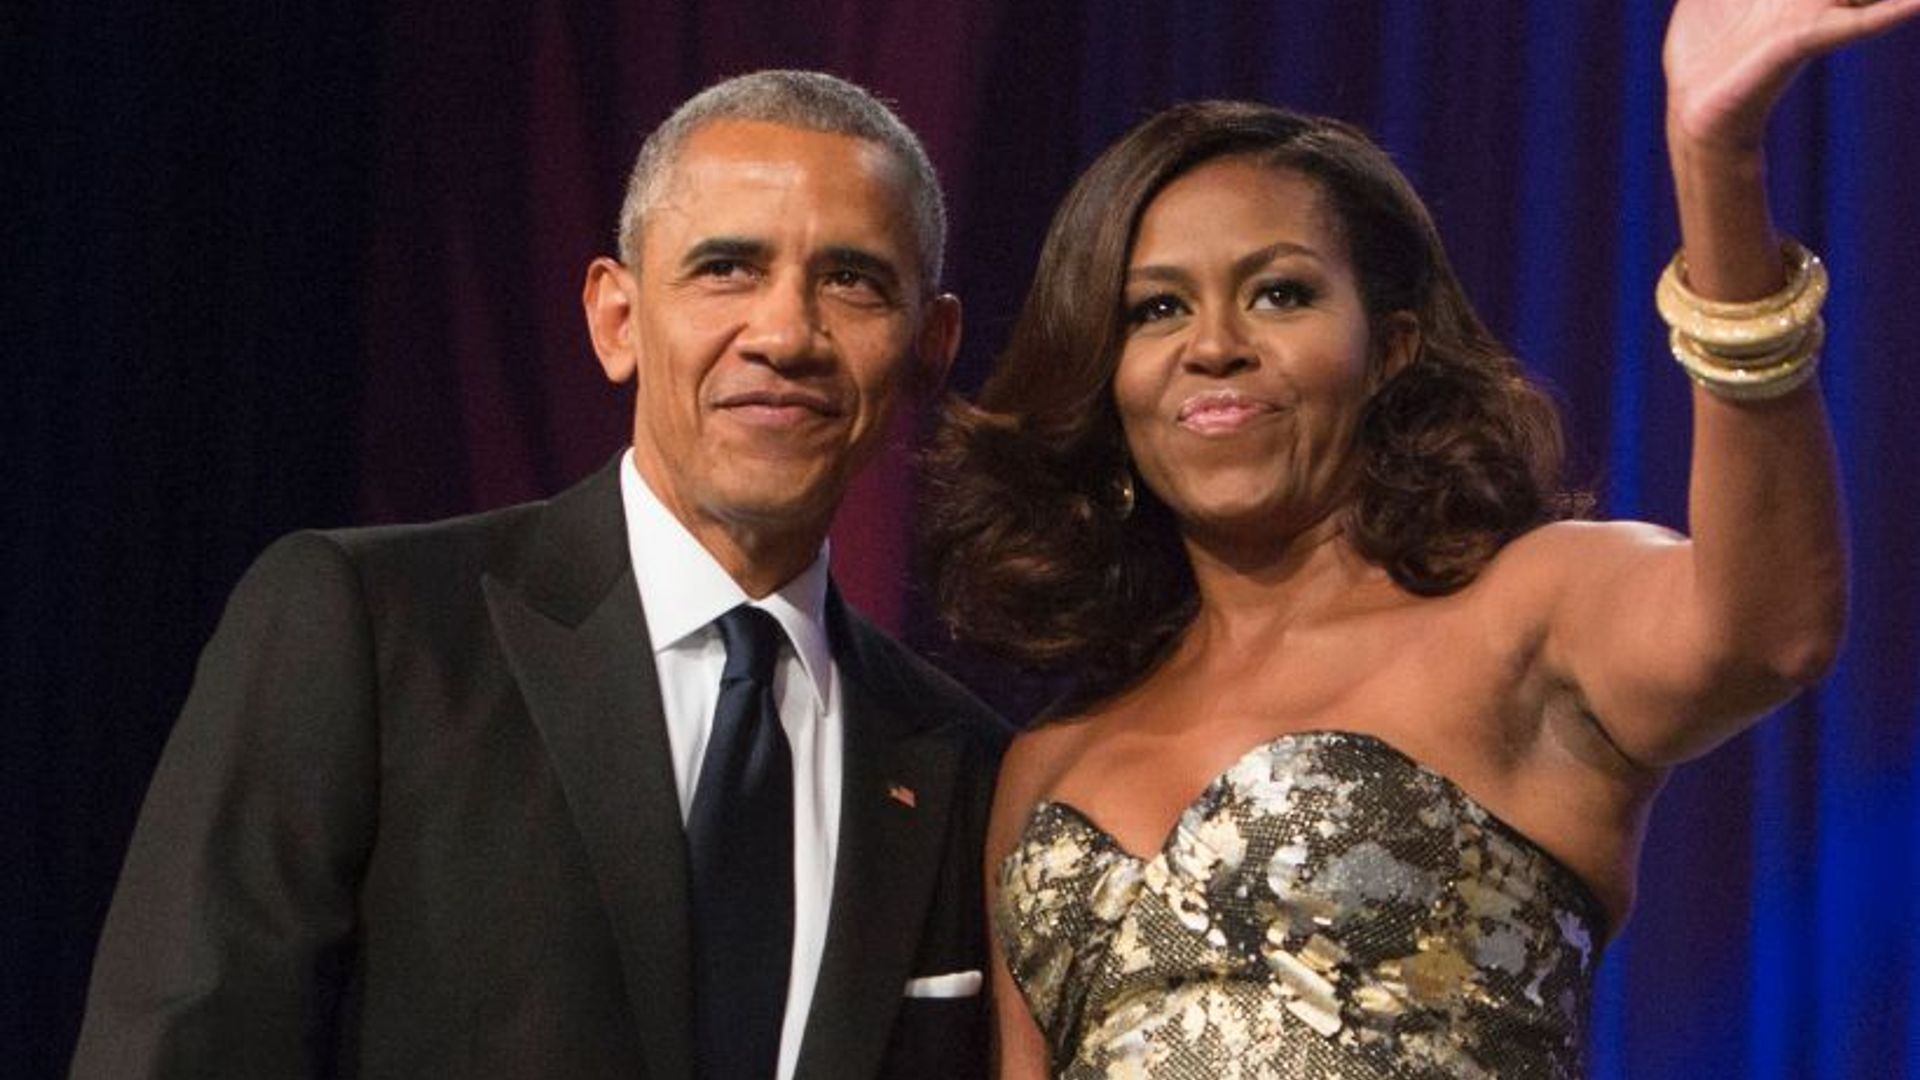 Are the Obamas considering a move to New York?